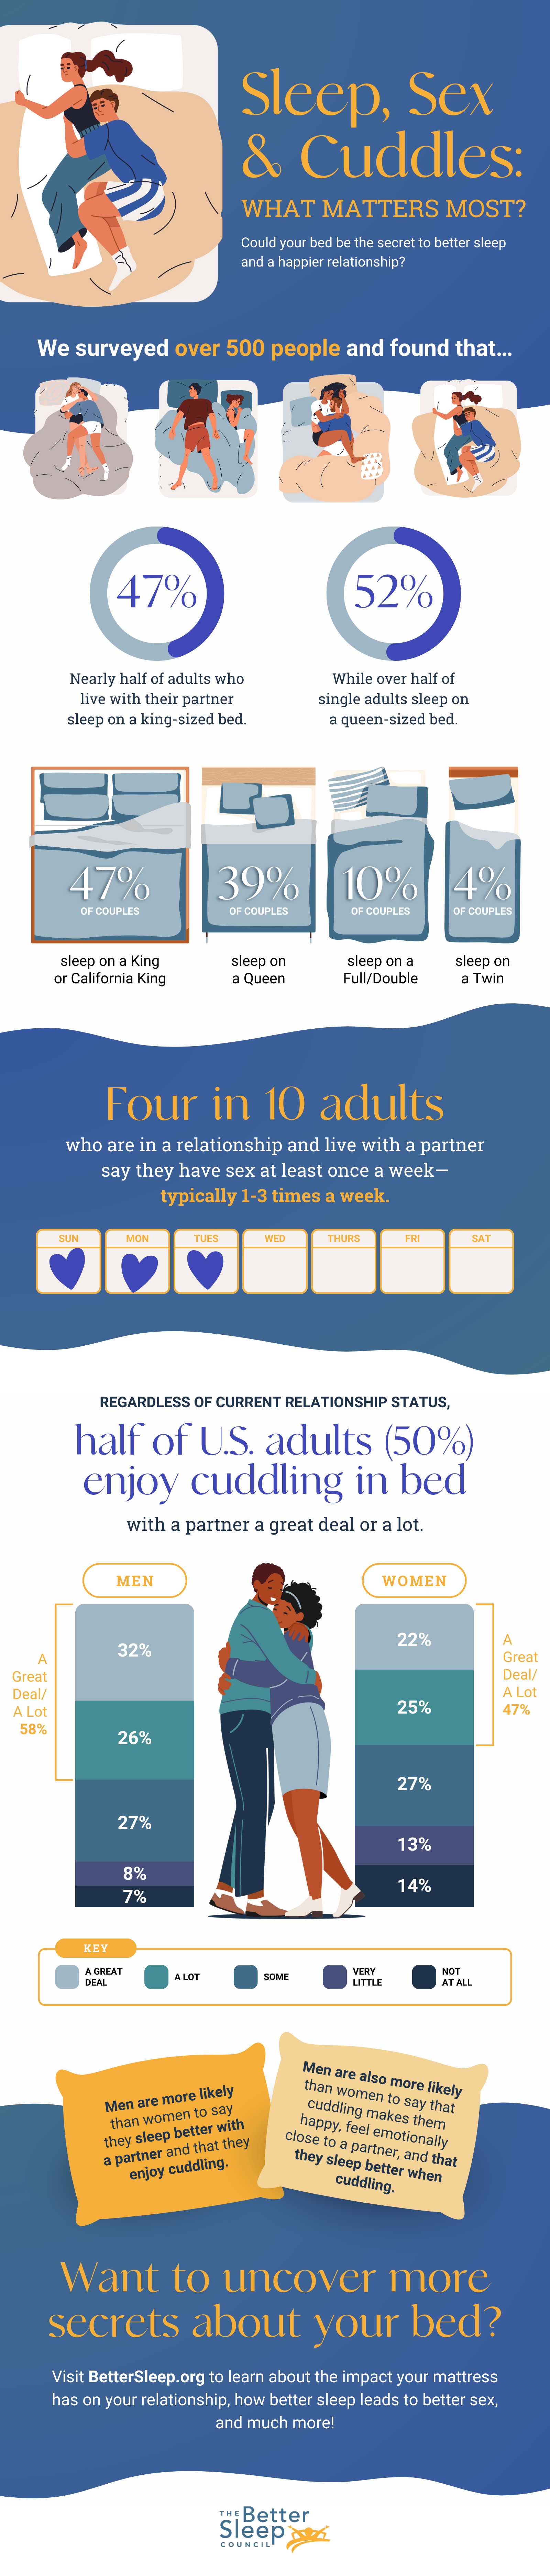 Sleep Sex and Cuddles - an informative infographic